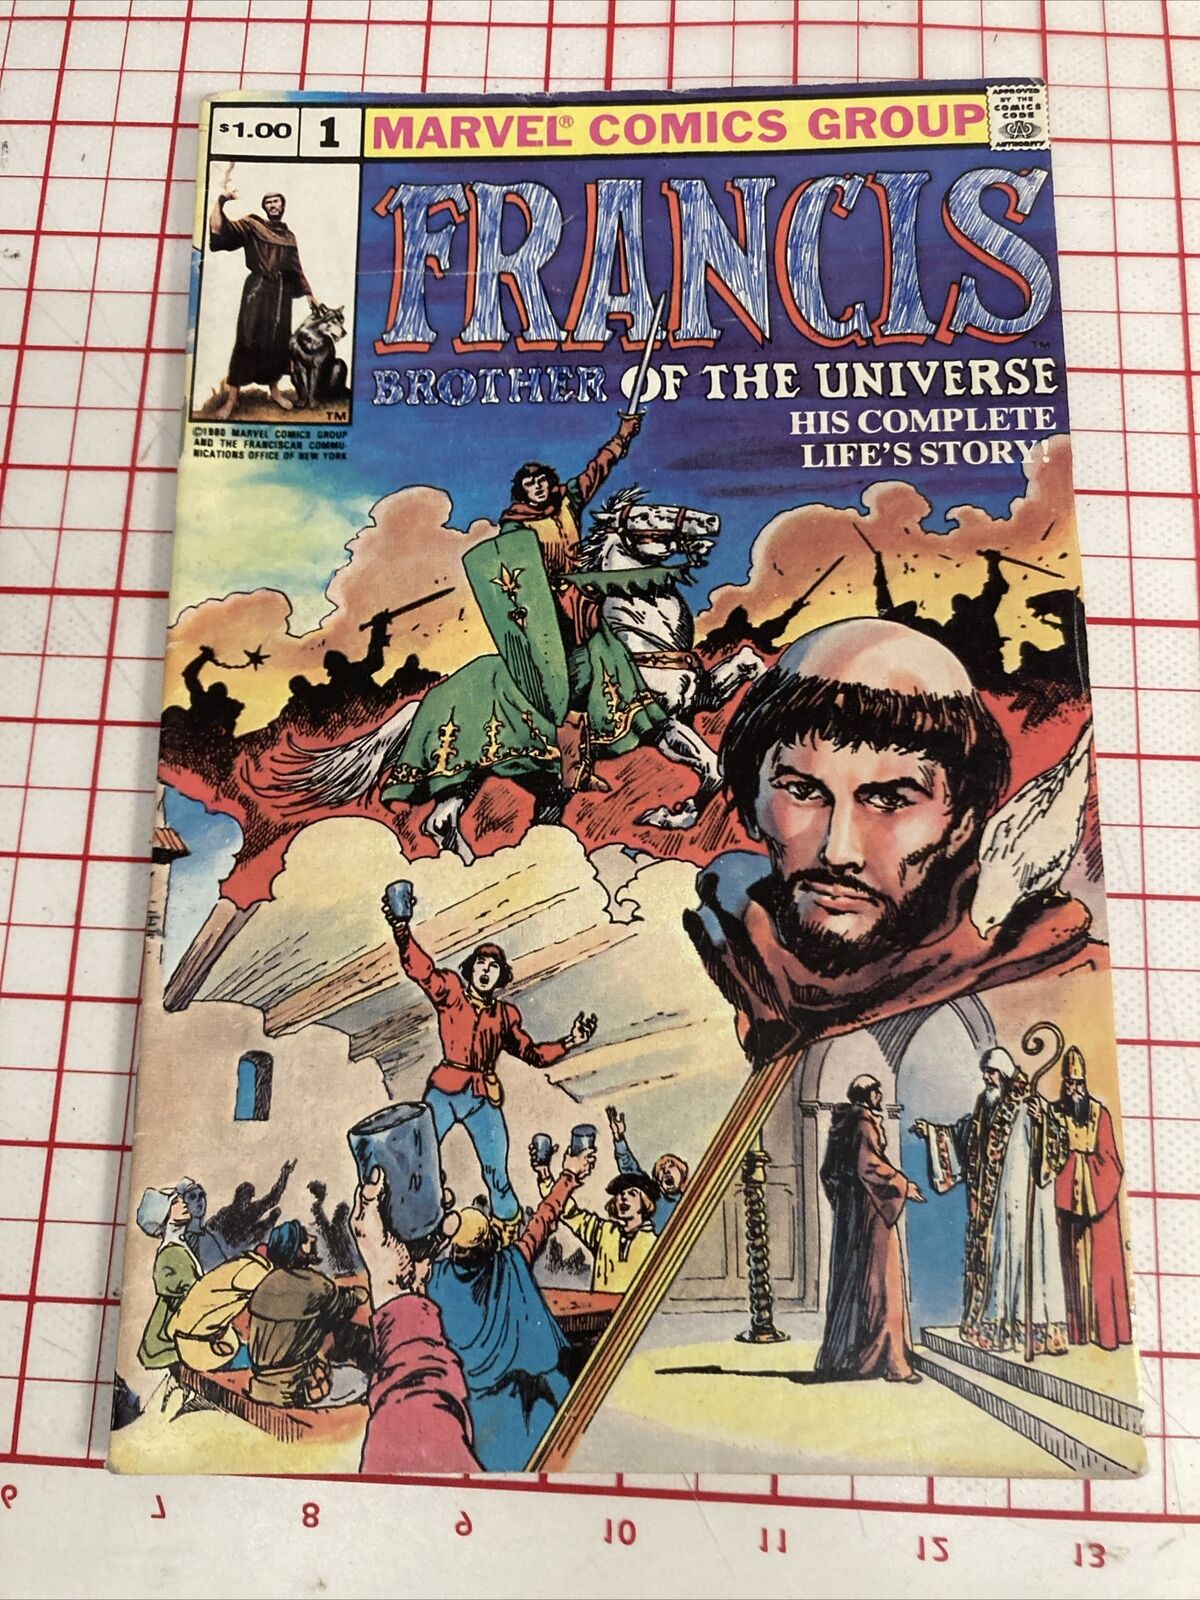 Francis Brother Of The Universe #1 (Marvel 1980) Complete Life Story FN